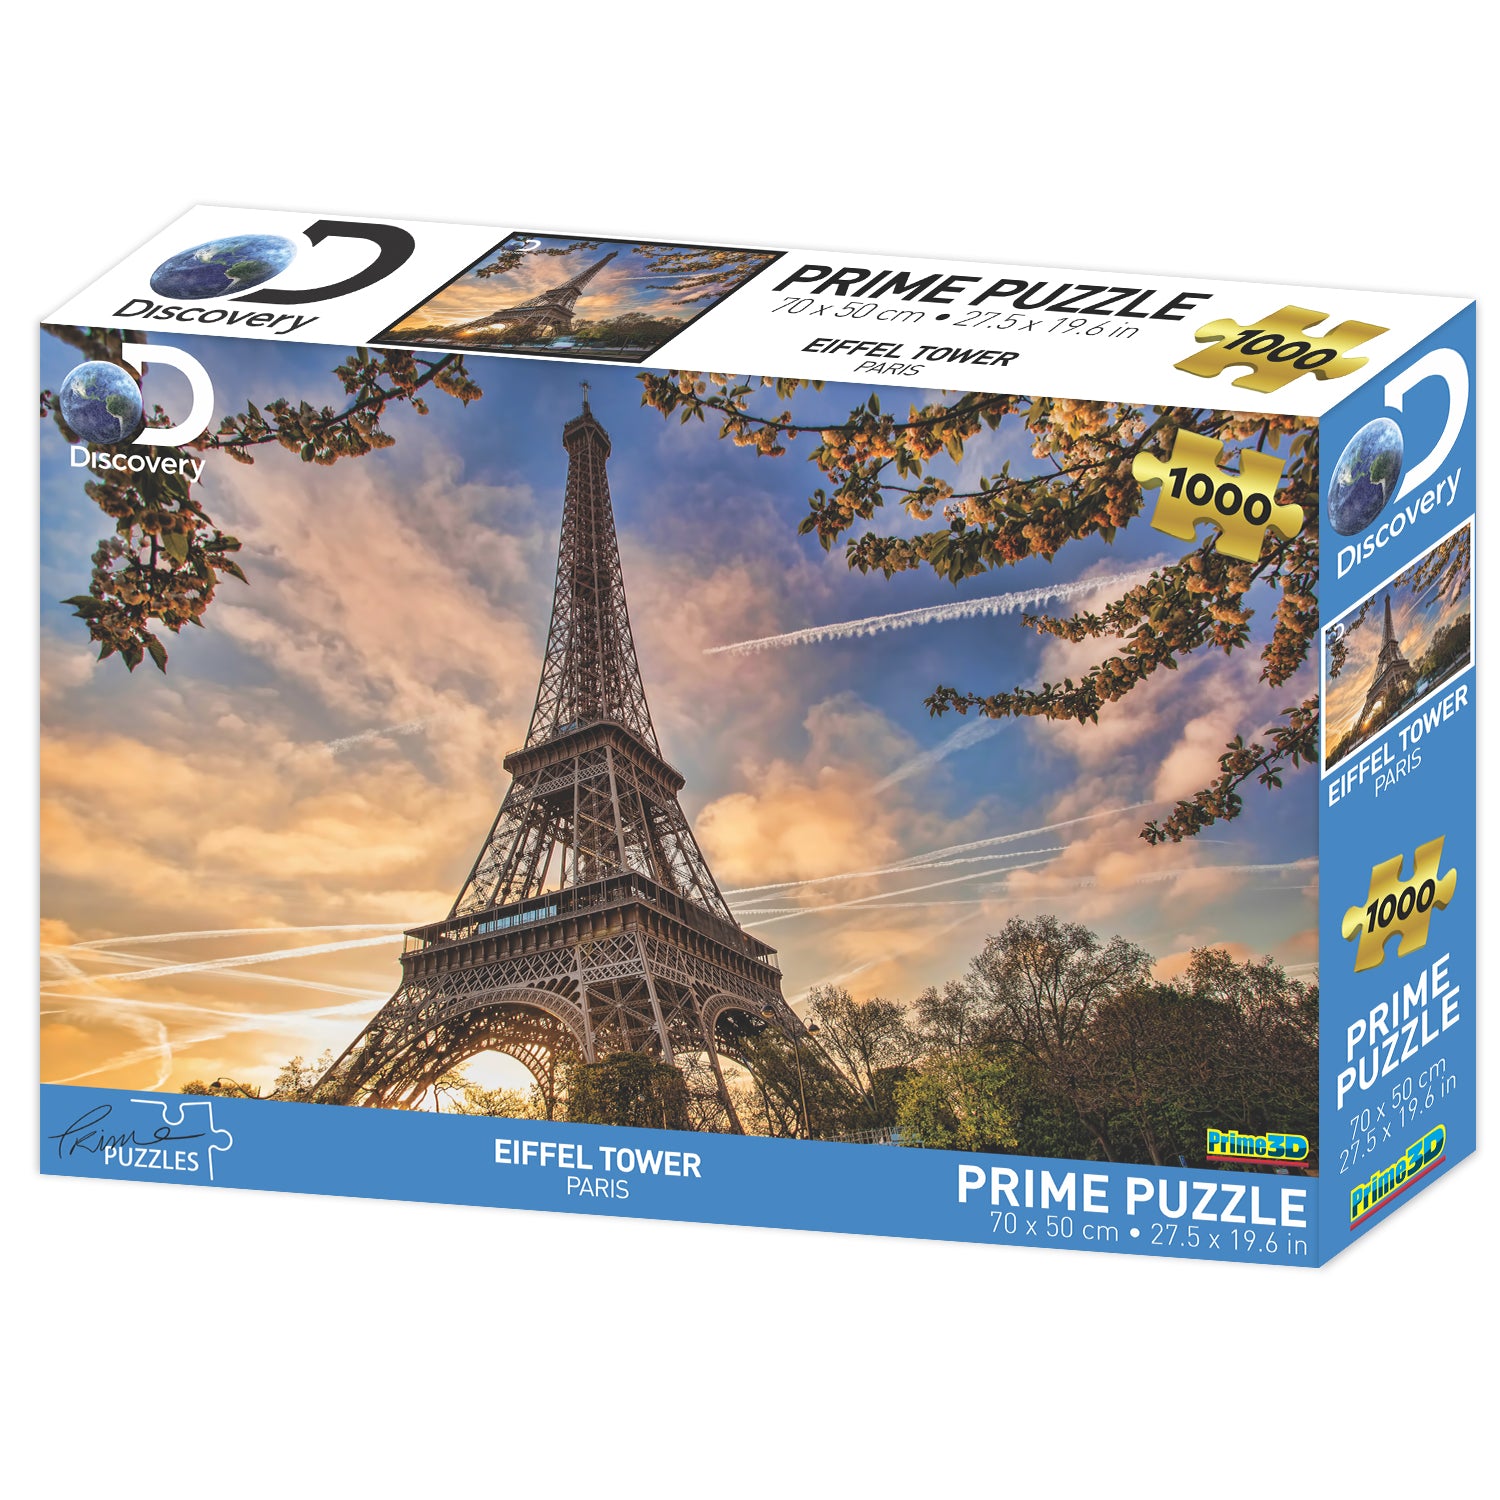 Discovery Eiffel Tower 1000 piece 3D Jigsaw Puzzle - Chester Model Centre